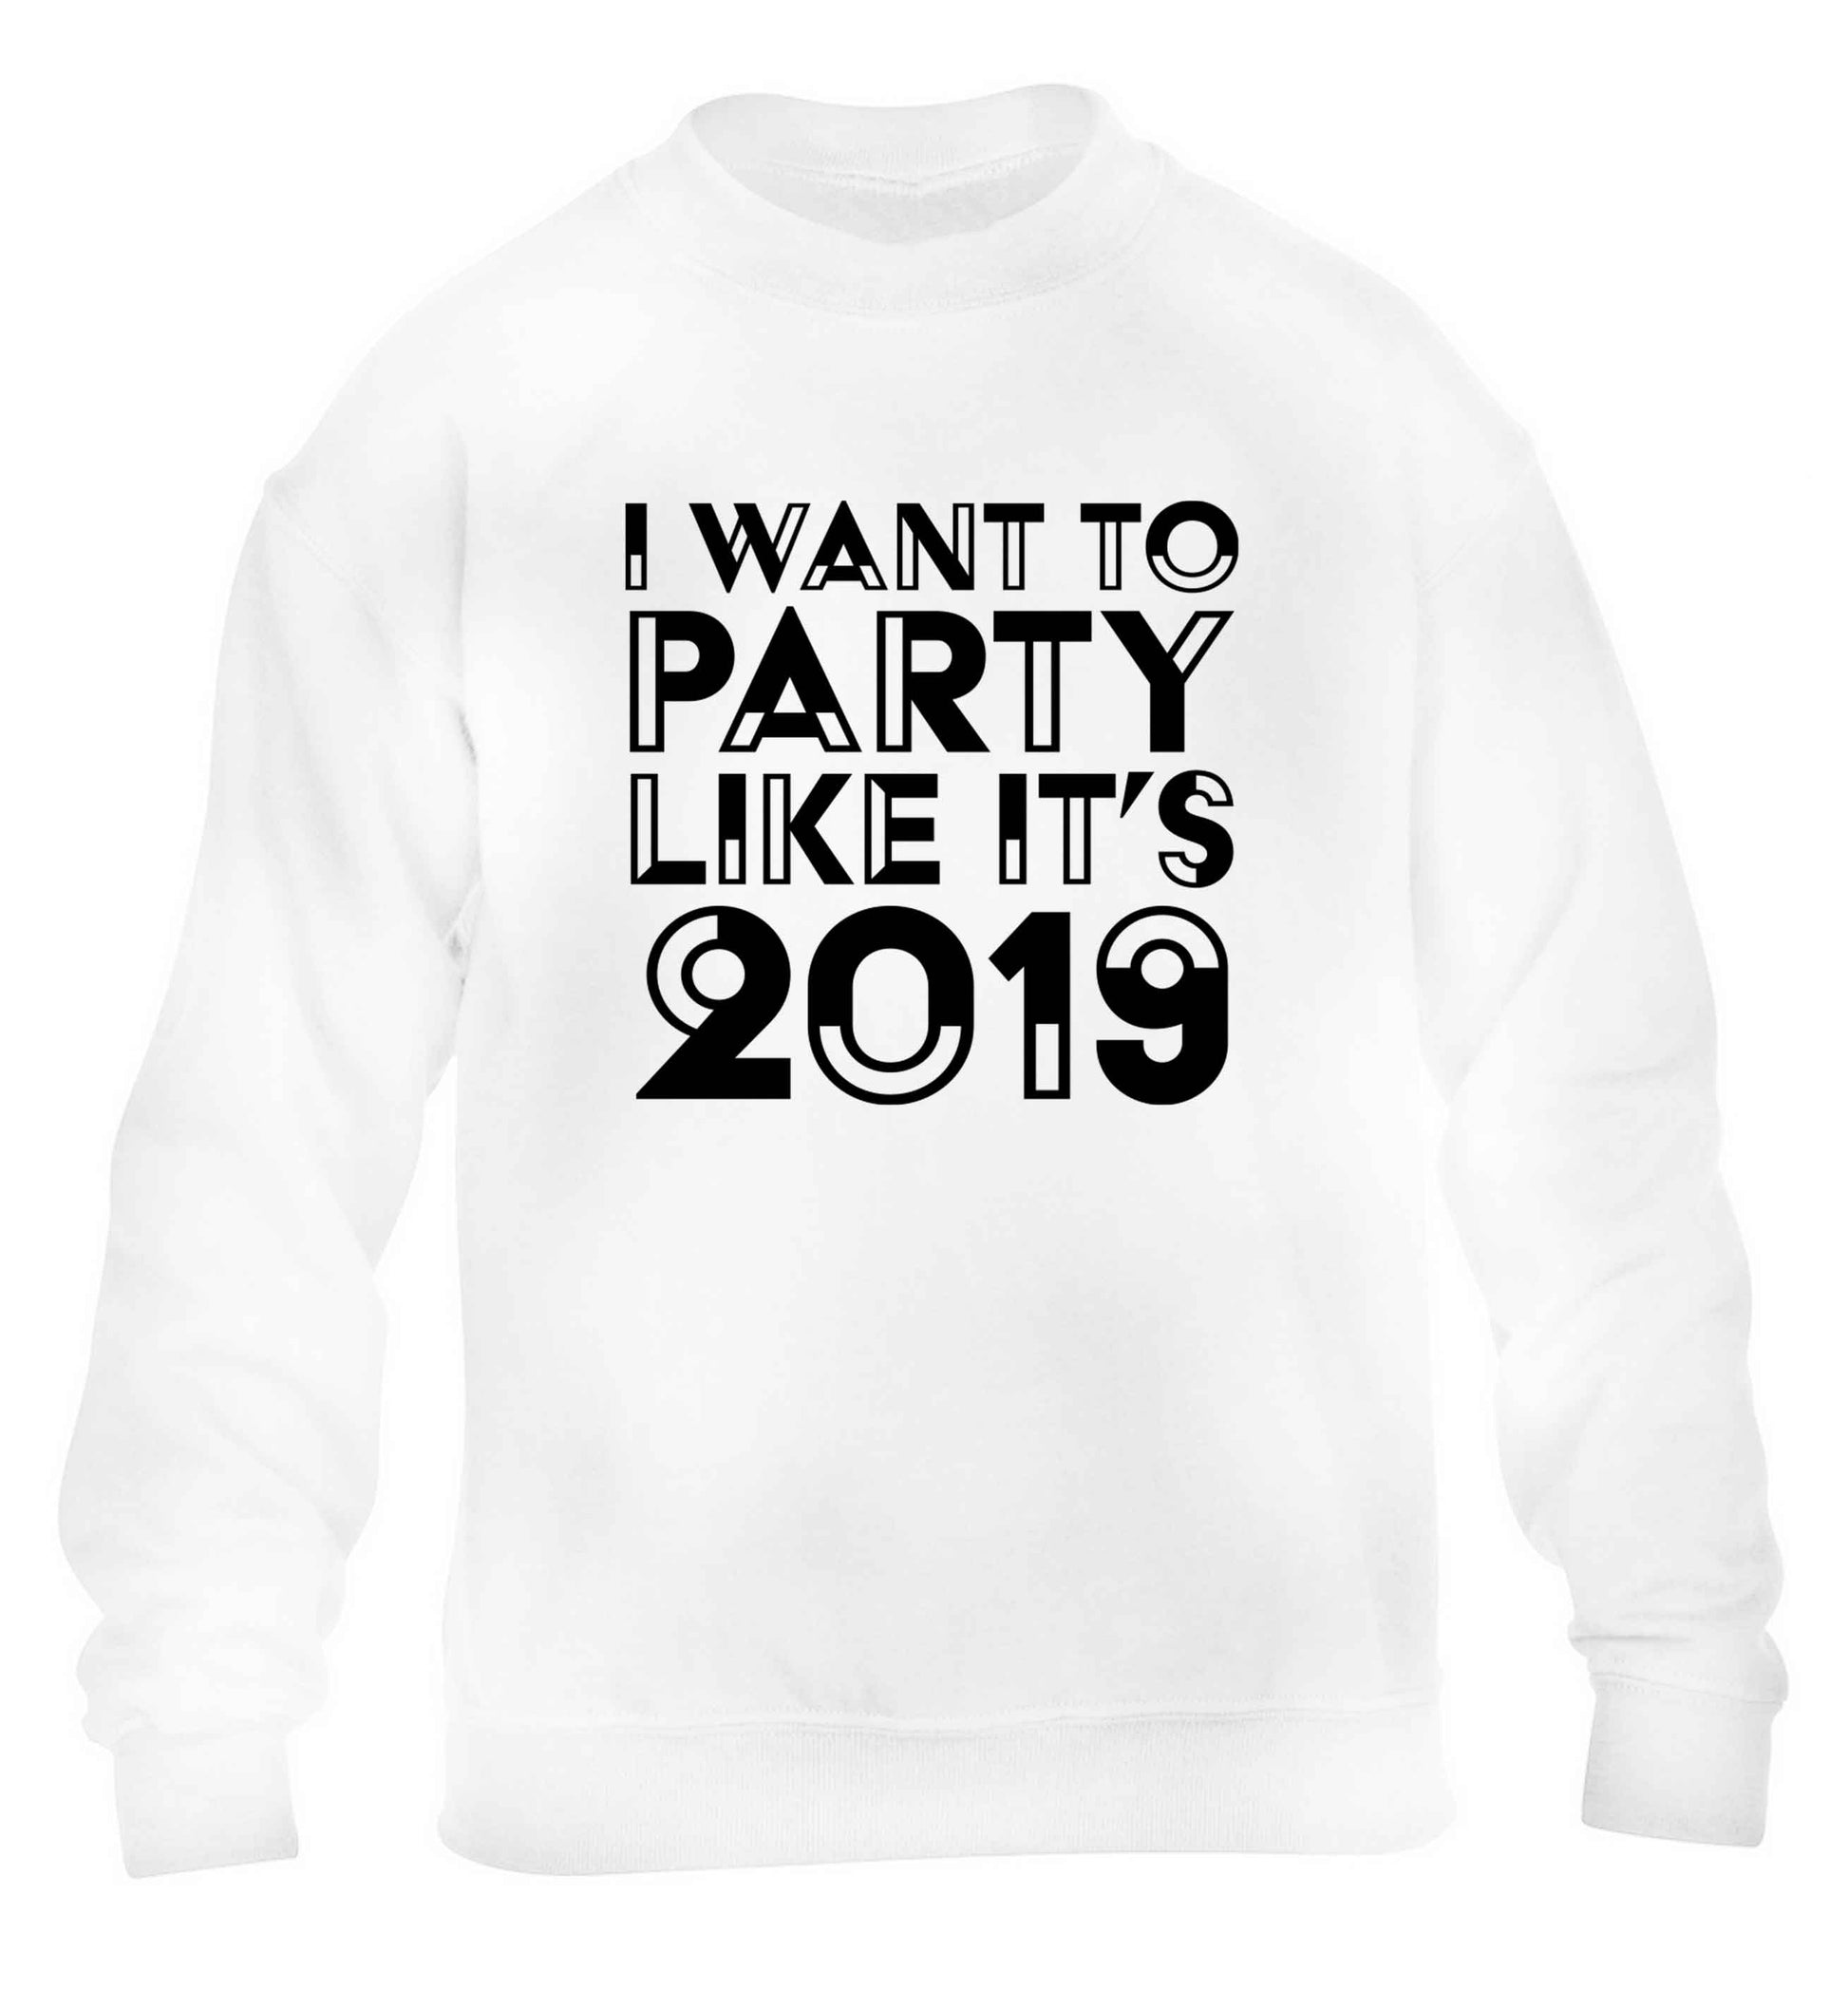 I want to party like it's 2019 children's white sweater 12-13 Years